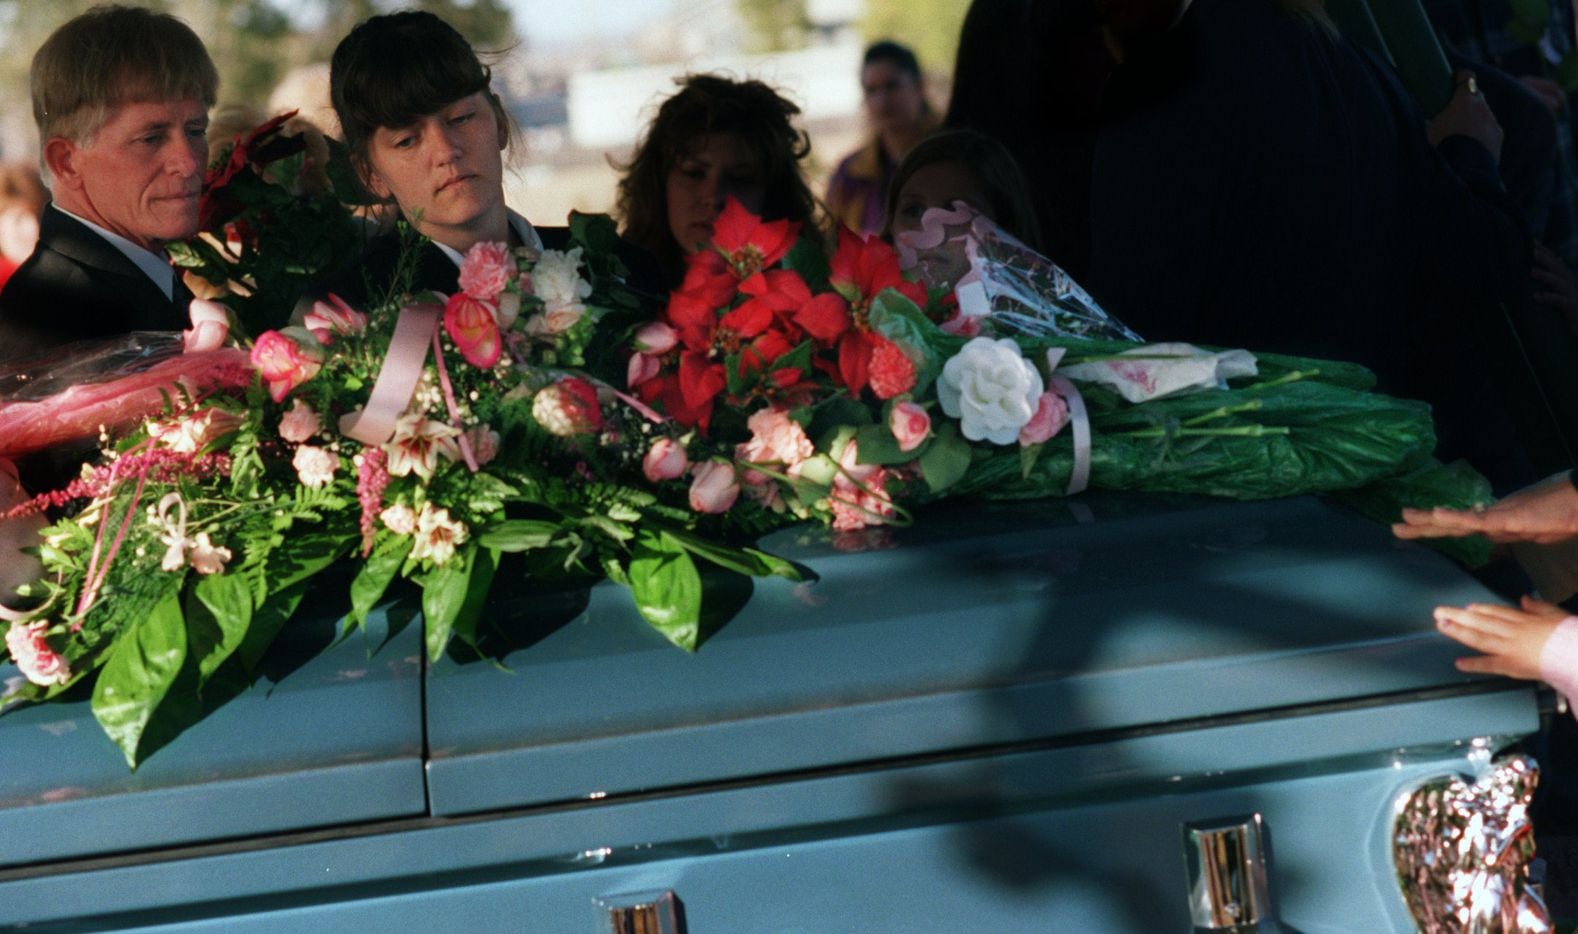 Amber Hagerman's parents lay a rose  on Amber's casket as they leave graveside services on Jan. 20, 1996 in Arlington.